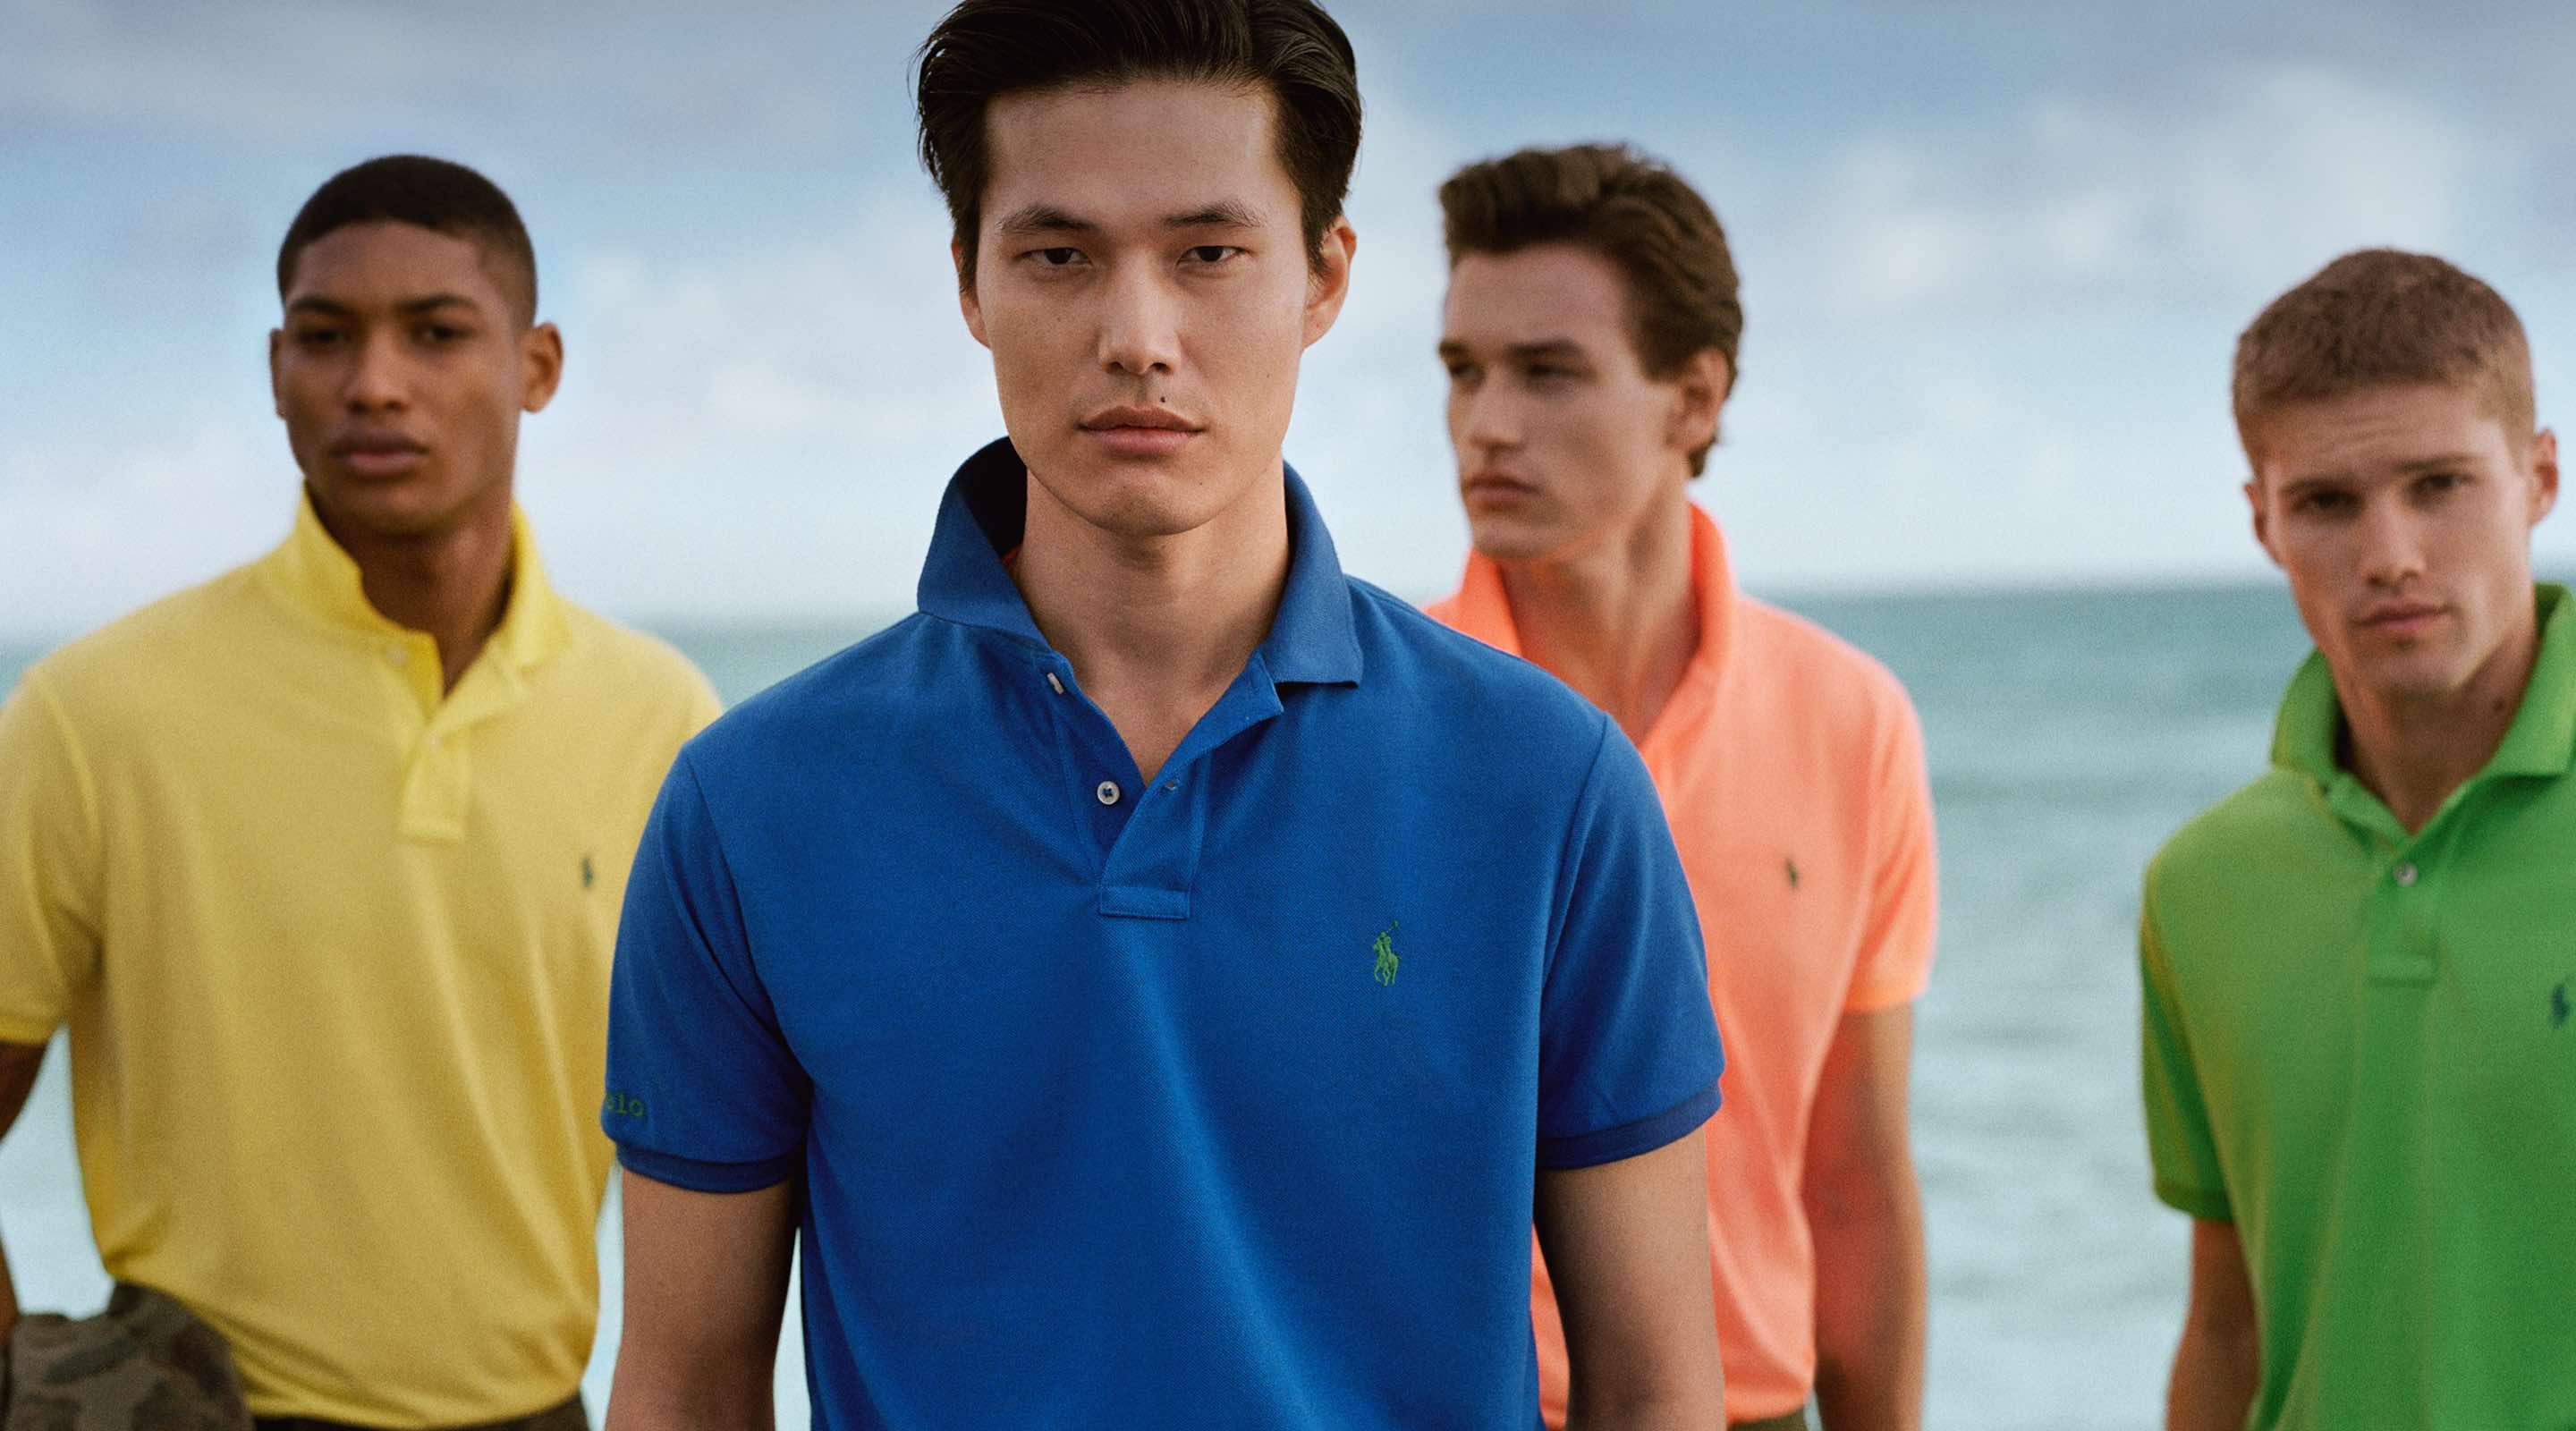 Men in colorful Polo shirts by the ocean